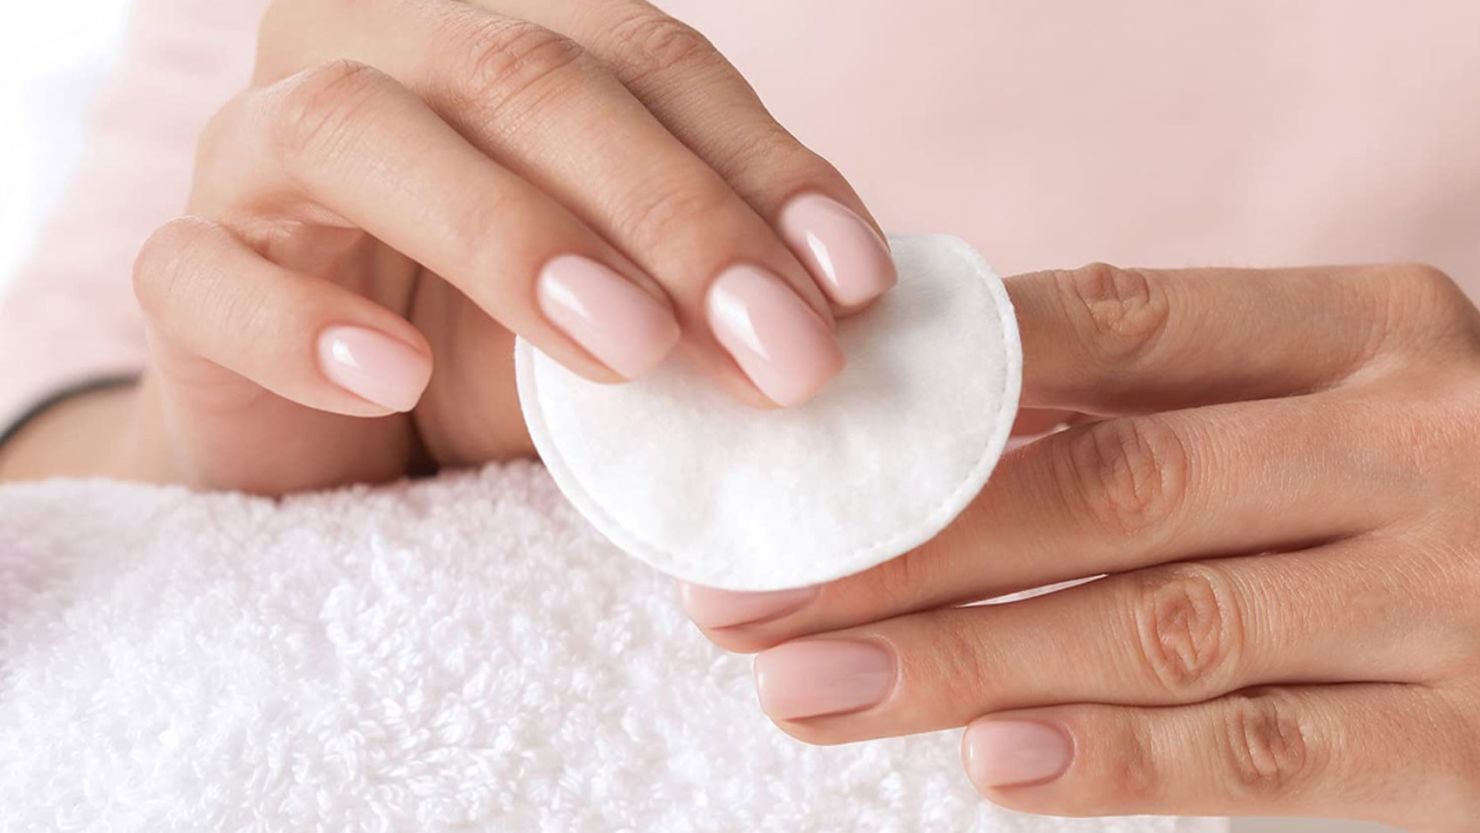 7 easy ways to remove acrylics at home